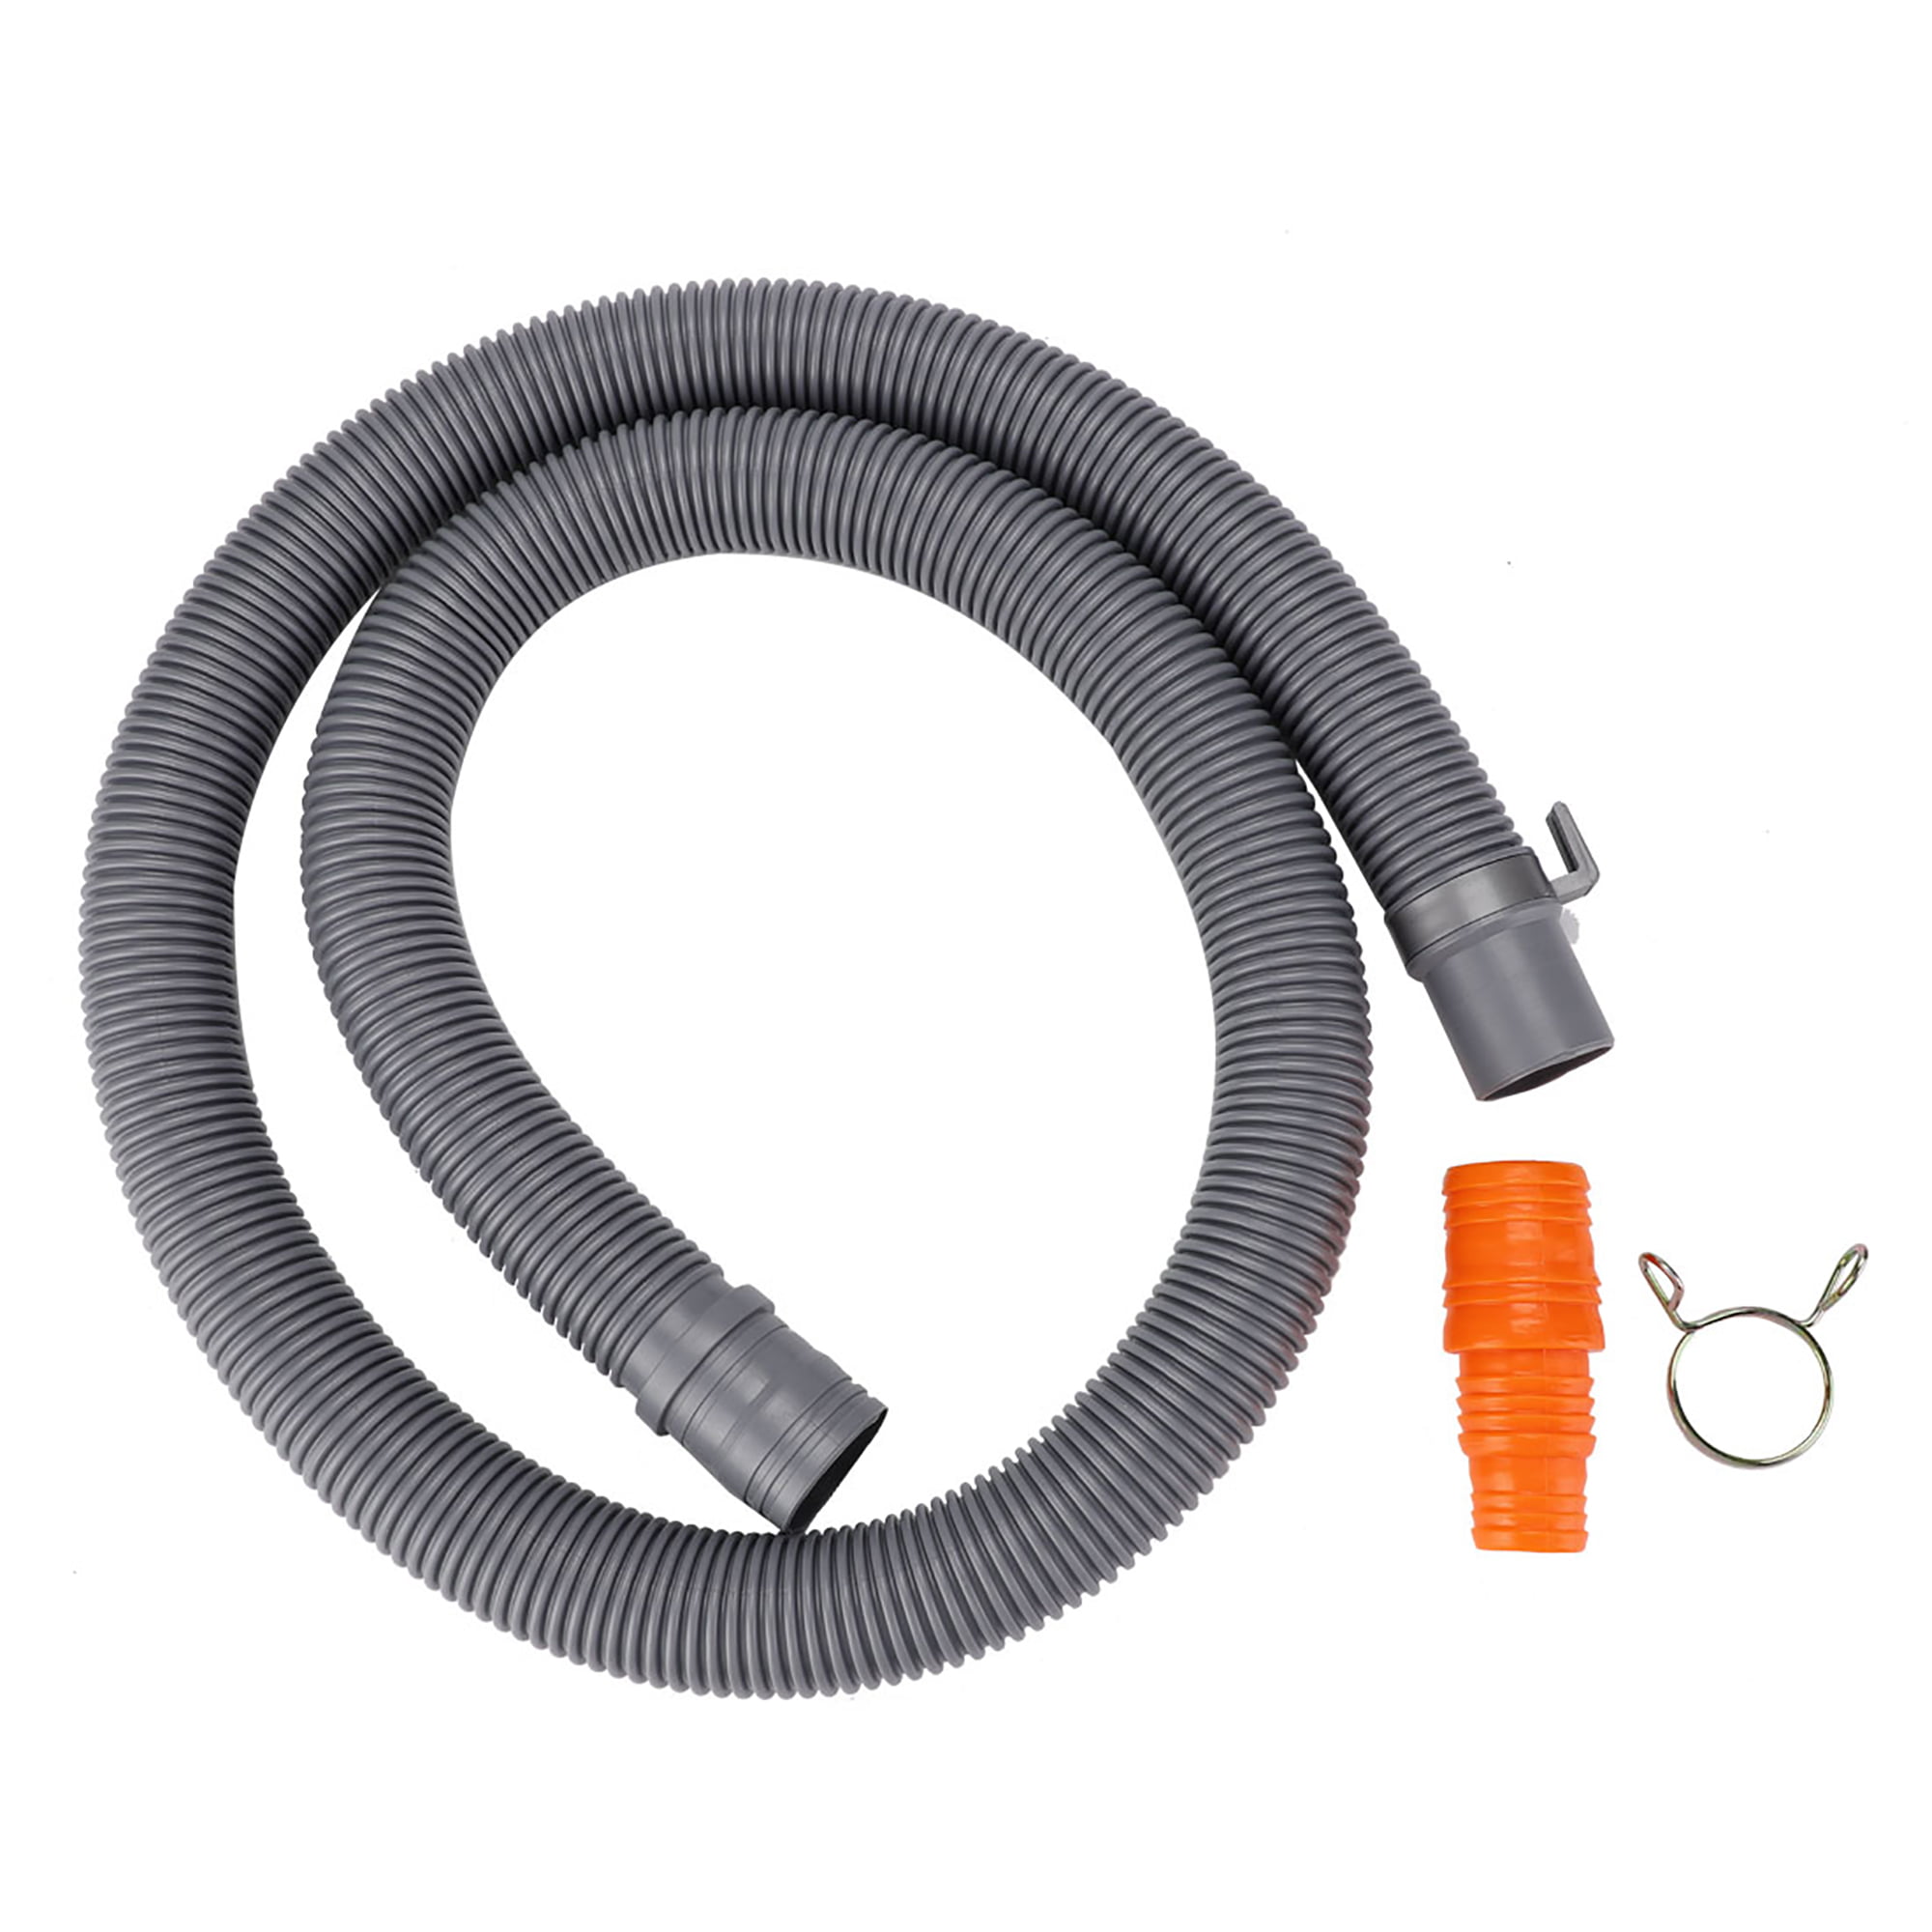 3 3 Feet Universal Wash Machine Drain Hoses With Clamp Adapter